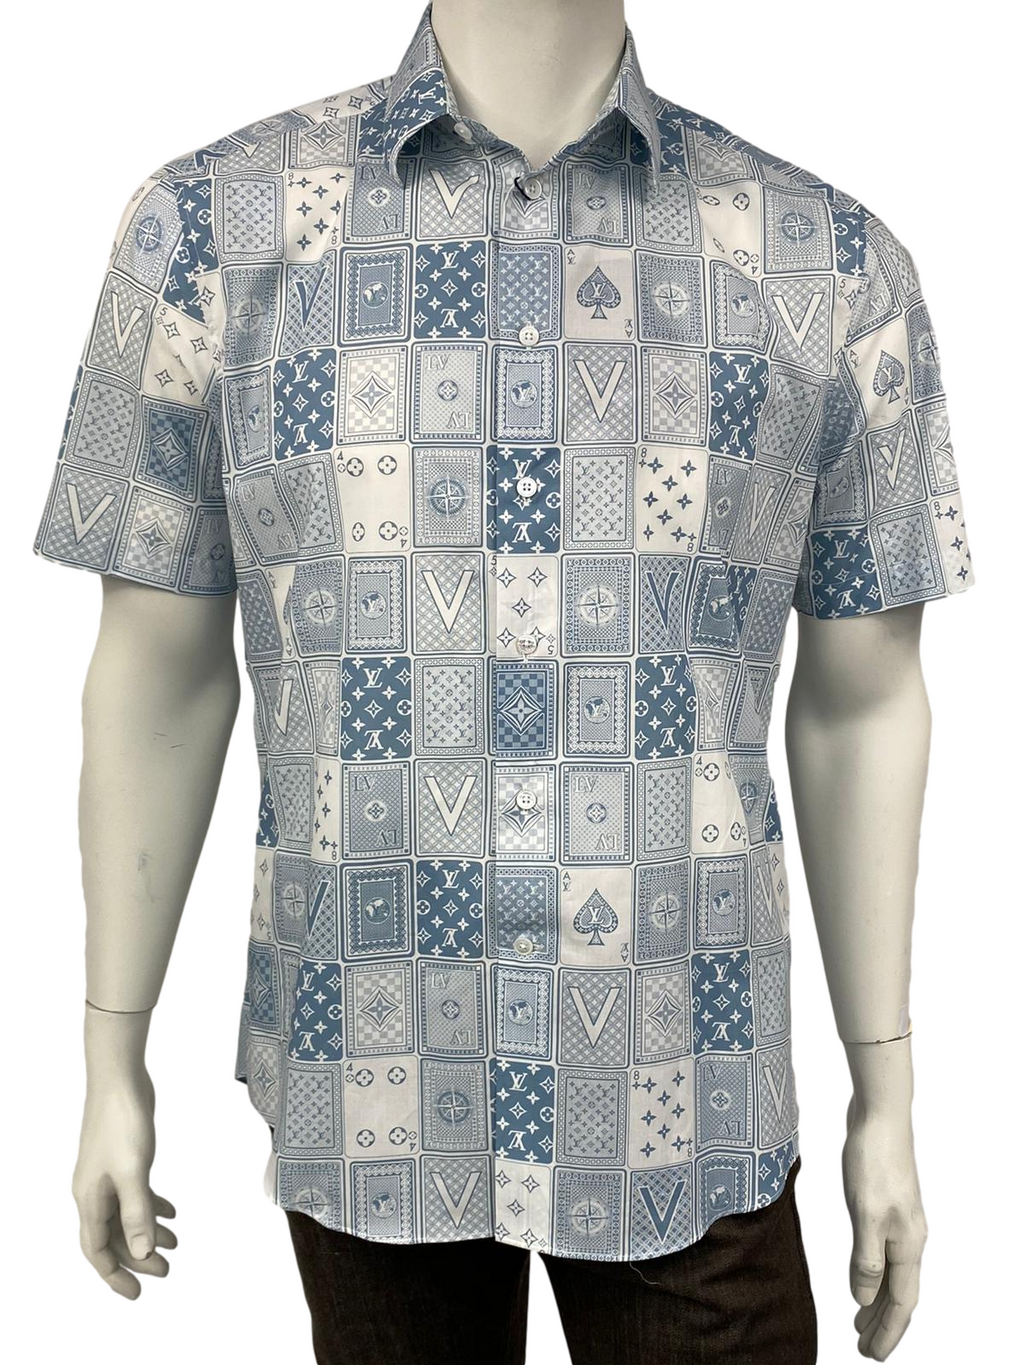 Louis Vuitton Men's Navy Cotton Regular Fit Classic Shirt With Stamps –  Luxuria & Co.